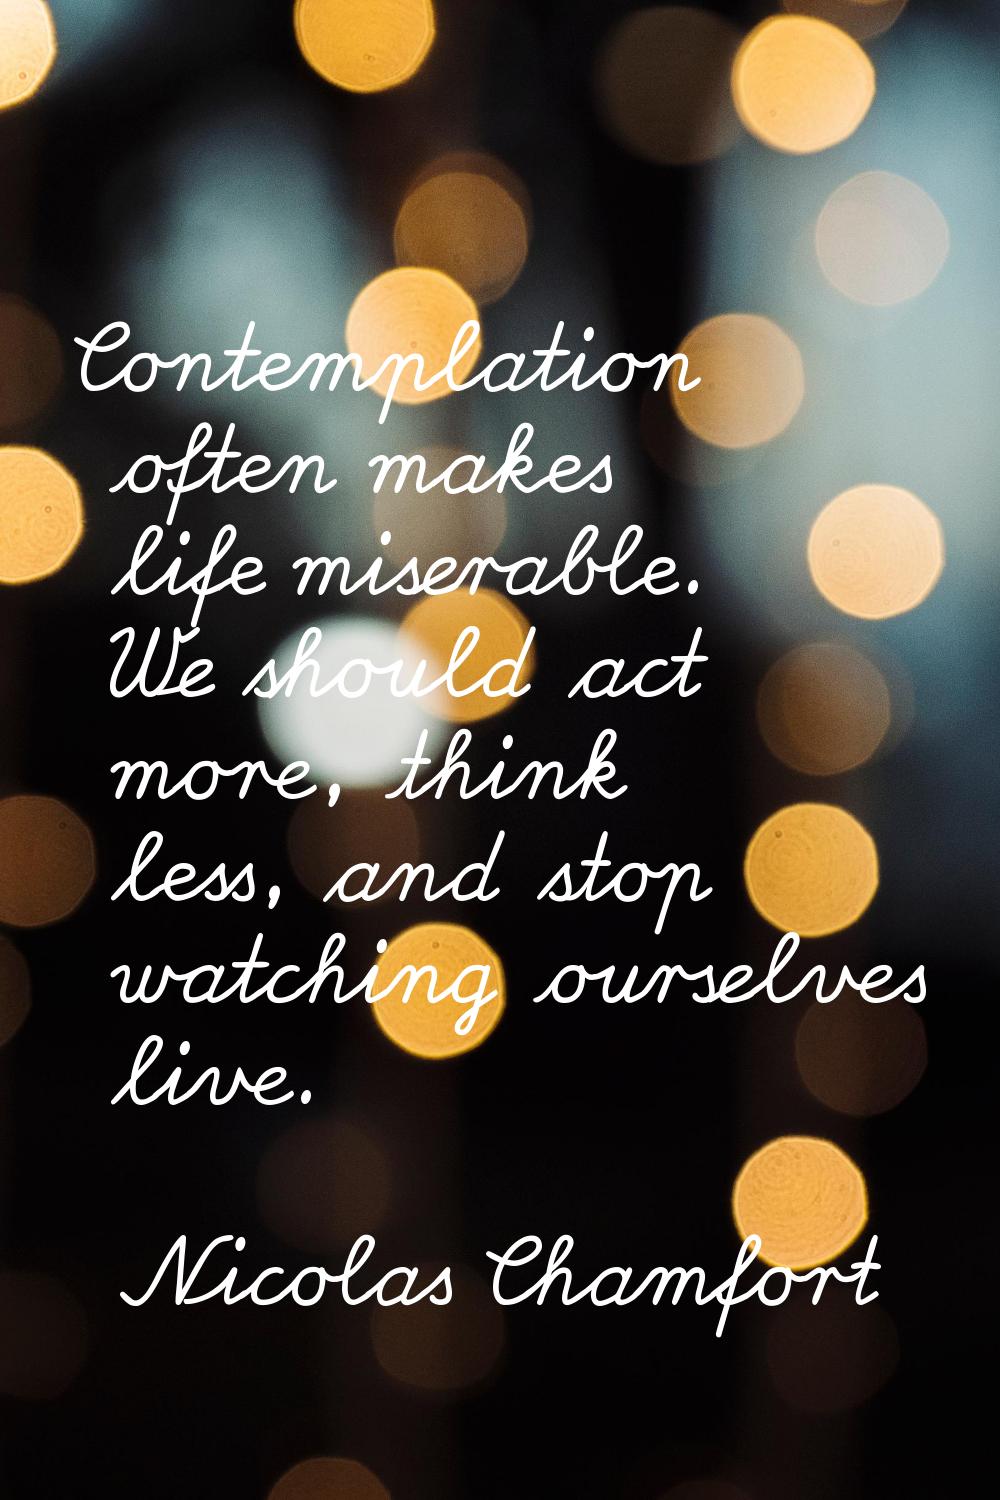 Contemplation often makes life miserable. We should act more, think less, and stop watching ourselv